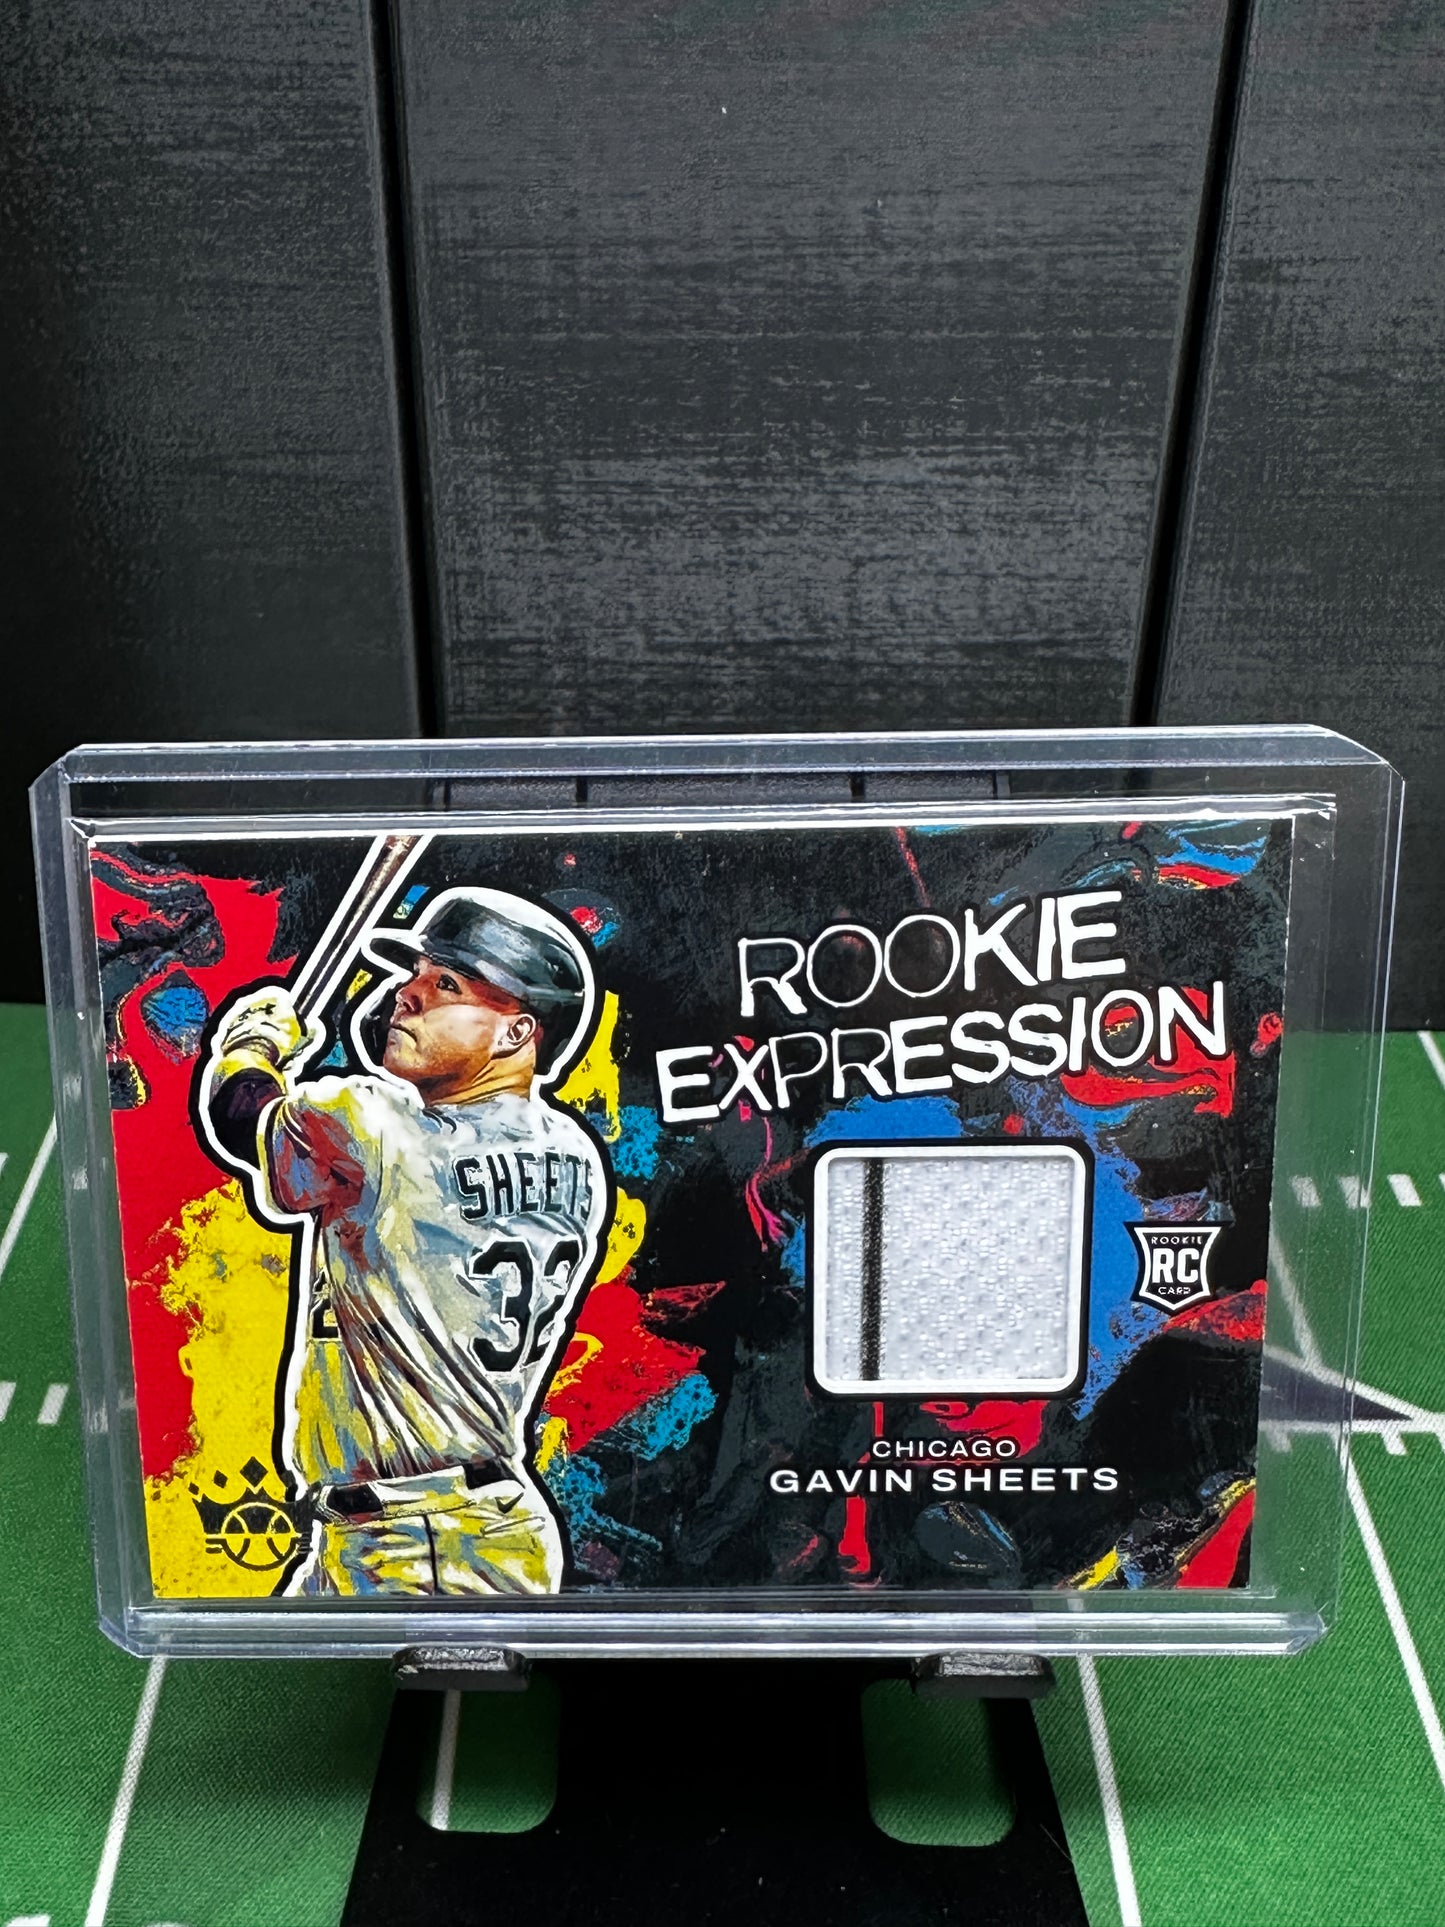 2022 Panini Diamond Kings Gavin Sheets RC Rookie Expression Jersey Patch